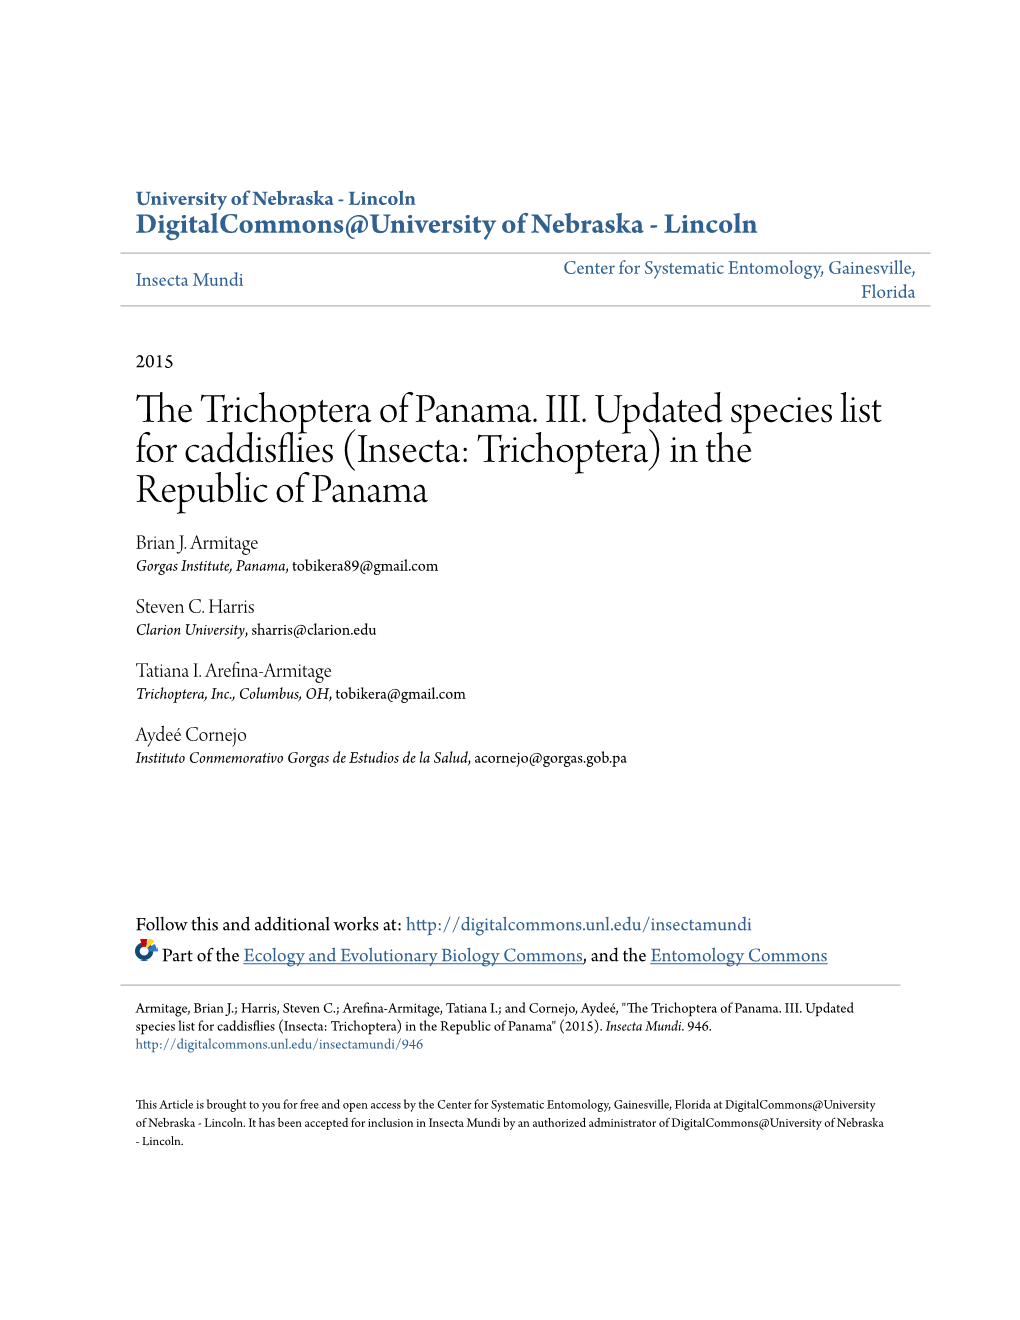 Insecta: Trichoptera) in the Republic of Panama" (2015)